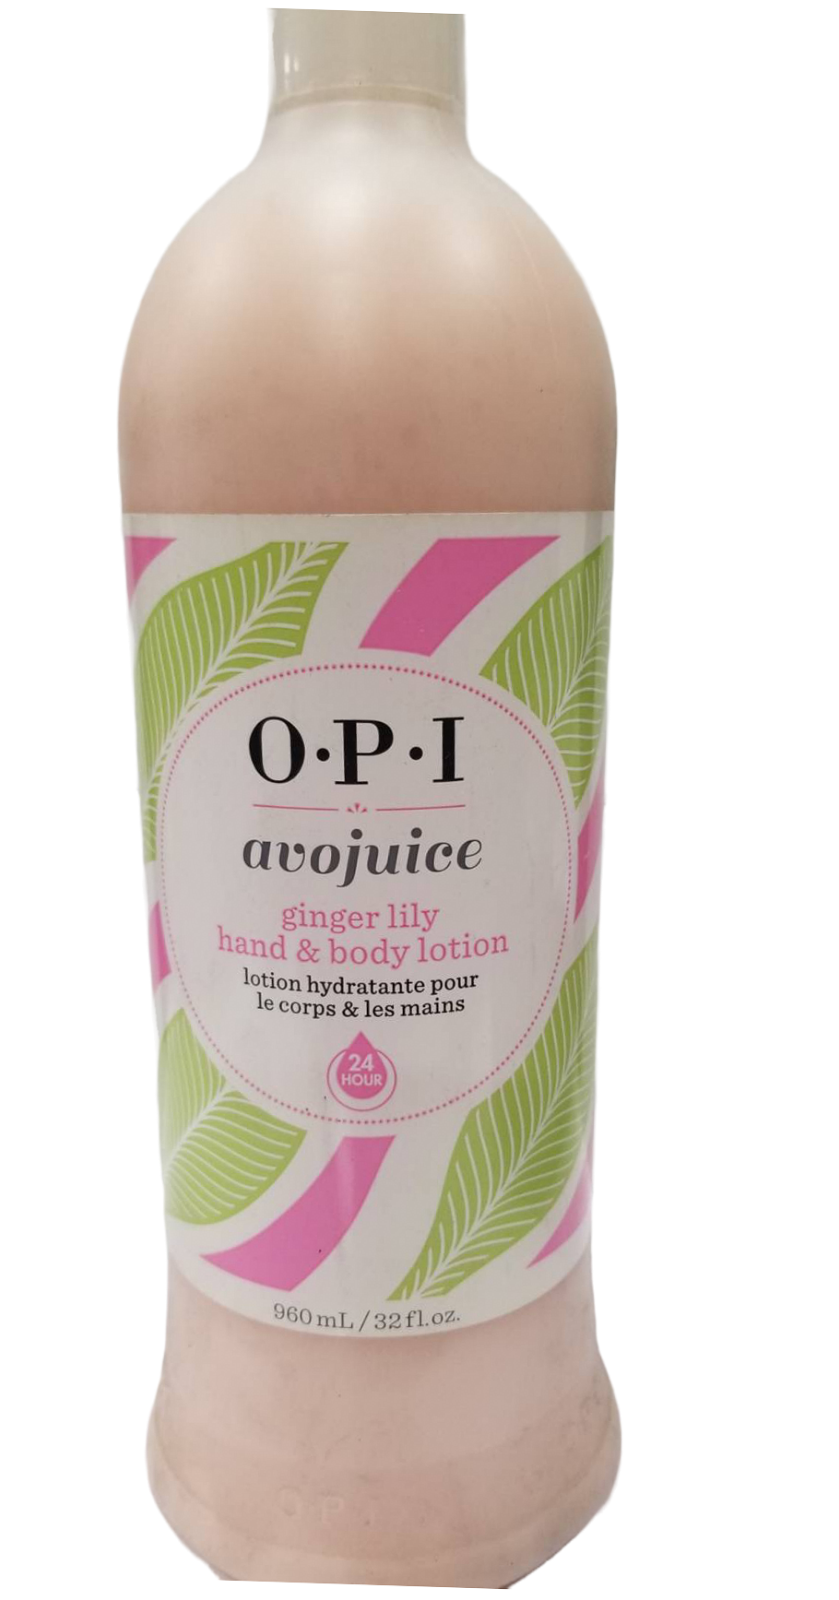 OPI Avojuice Hand & Body Lotion Ginger Lily 960 ml/32 fl oz New